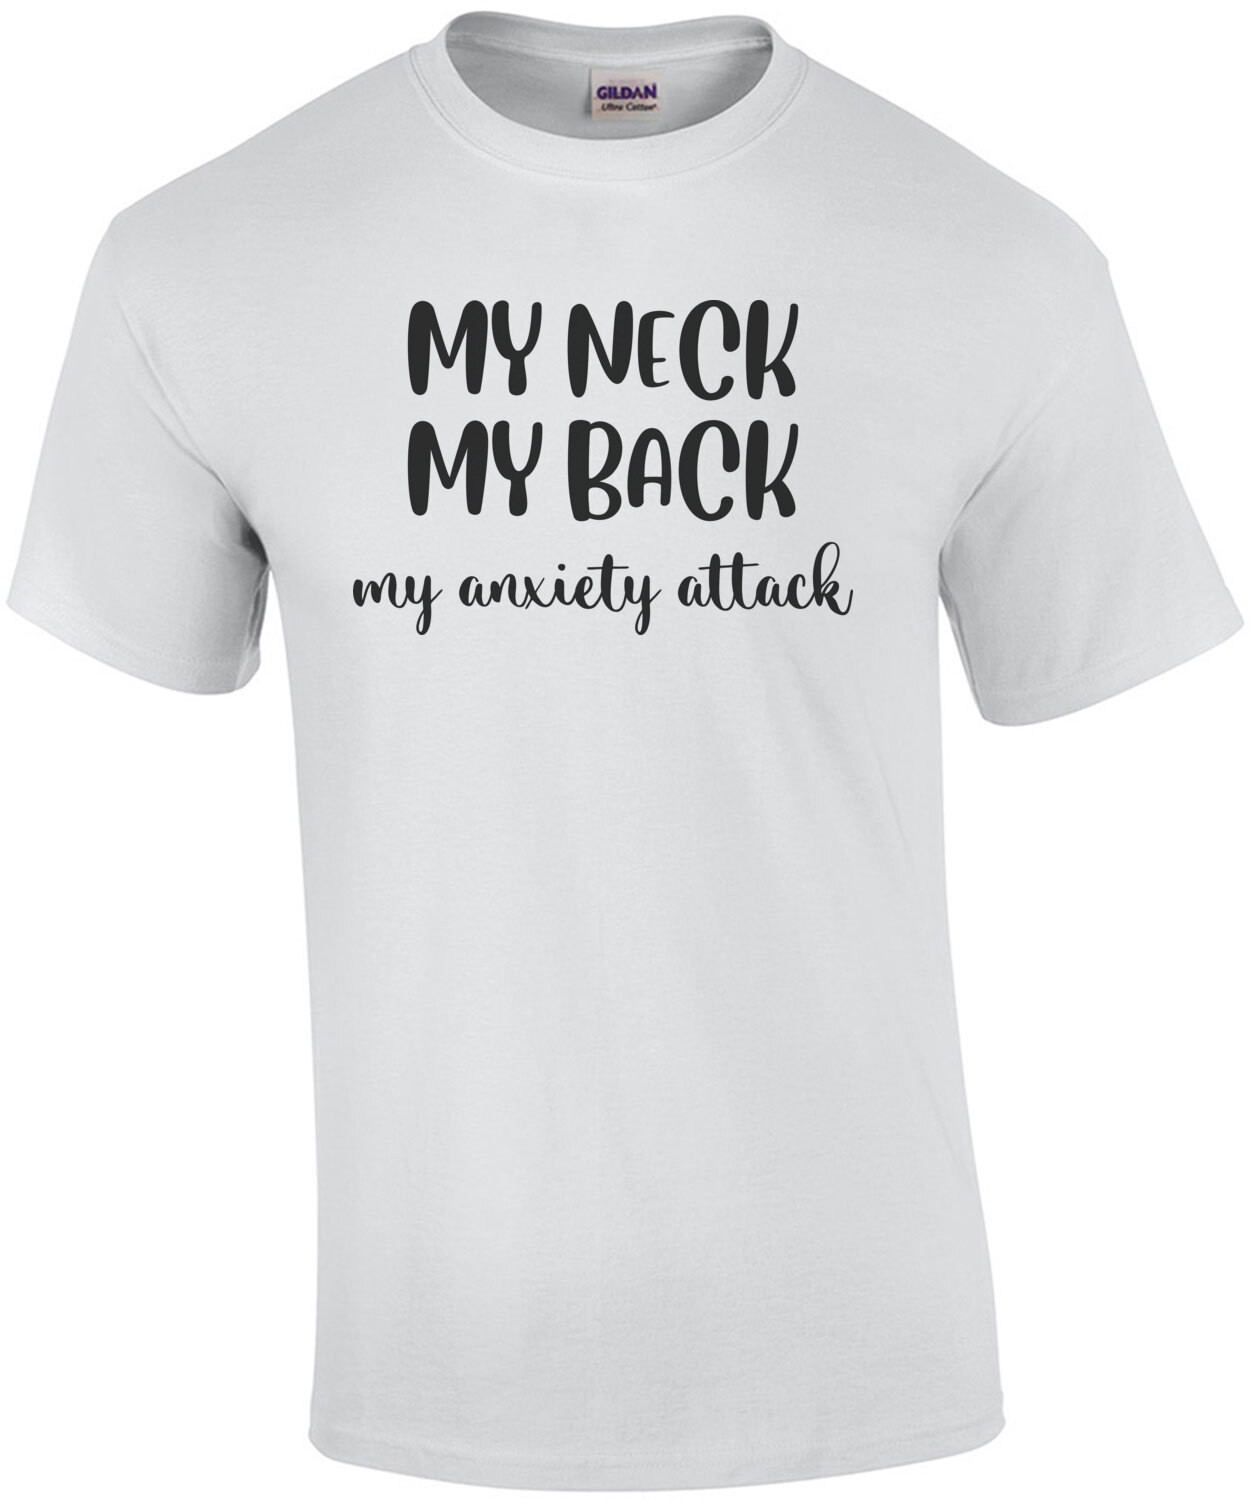 My neck, my back, my anxiety attack - ladies t-shirt